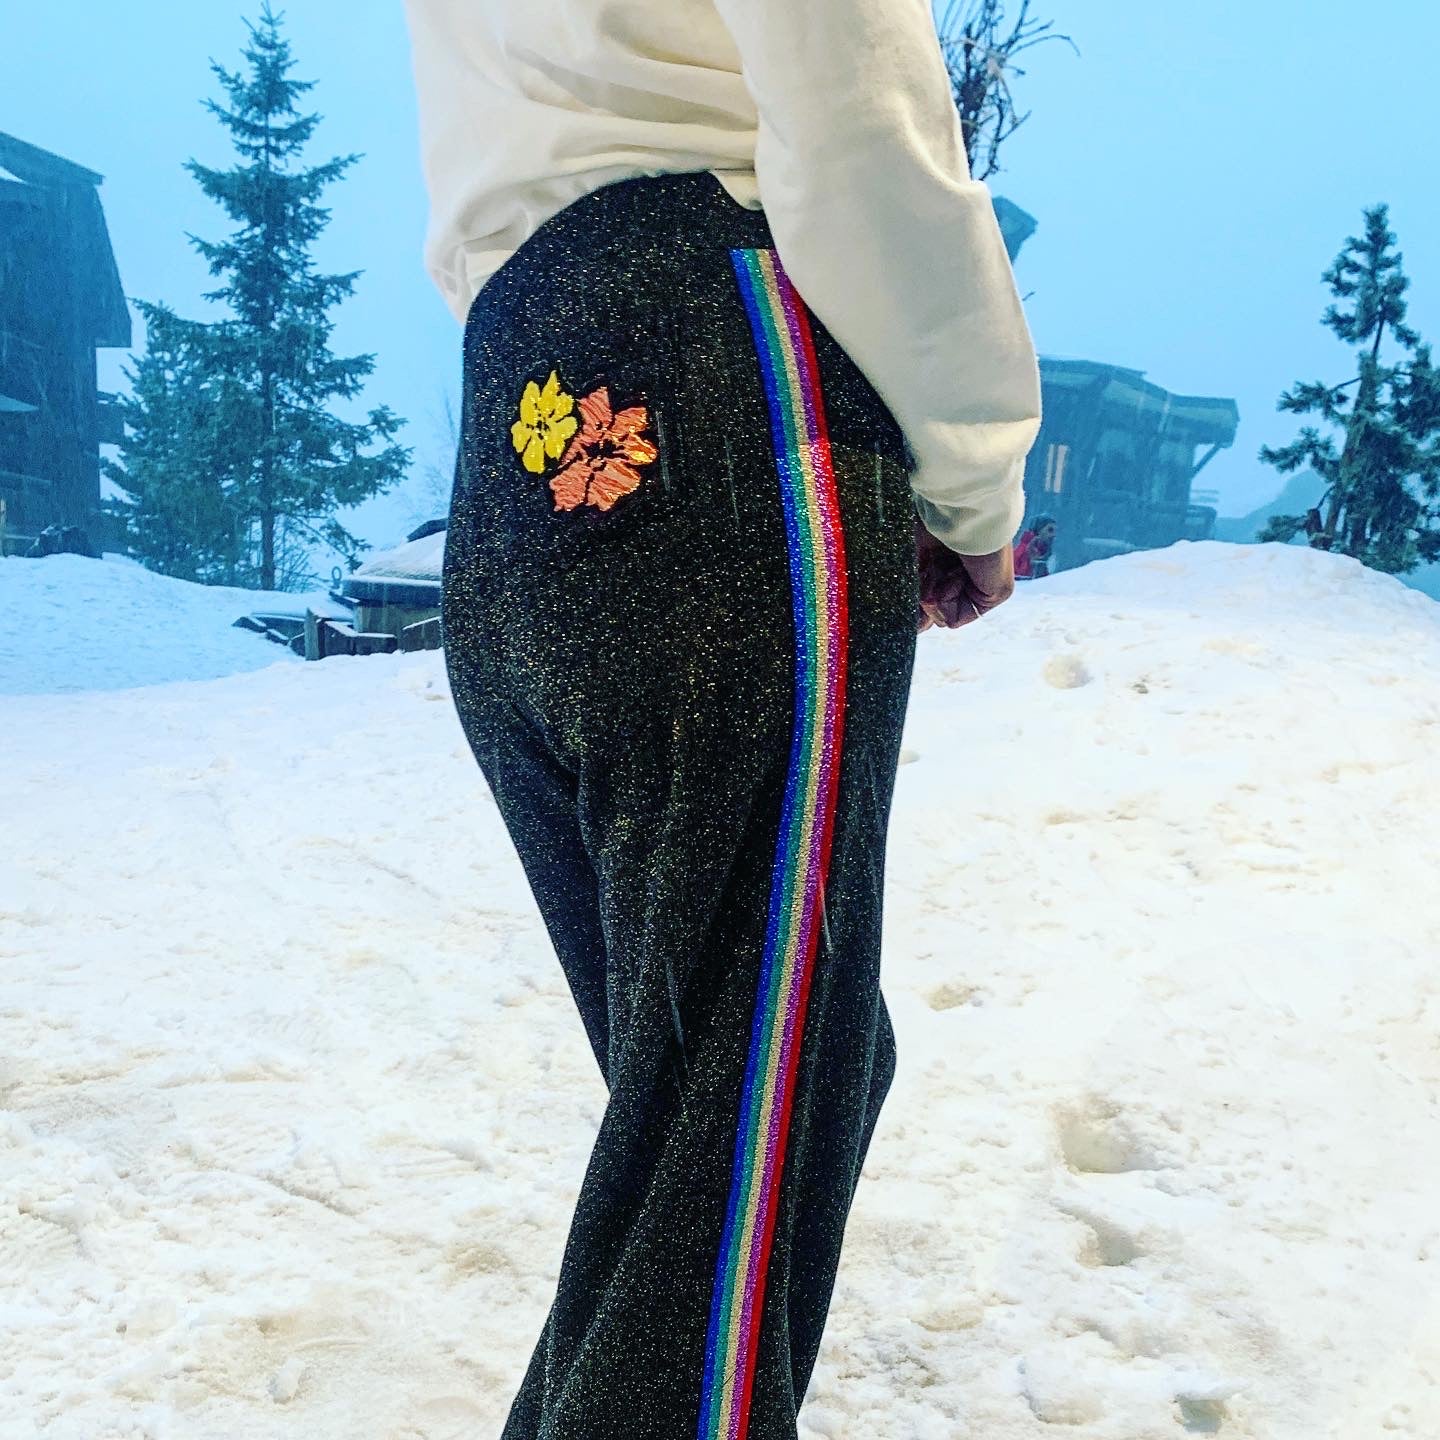 The 'Garland' trousers